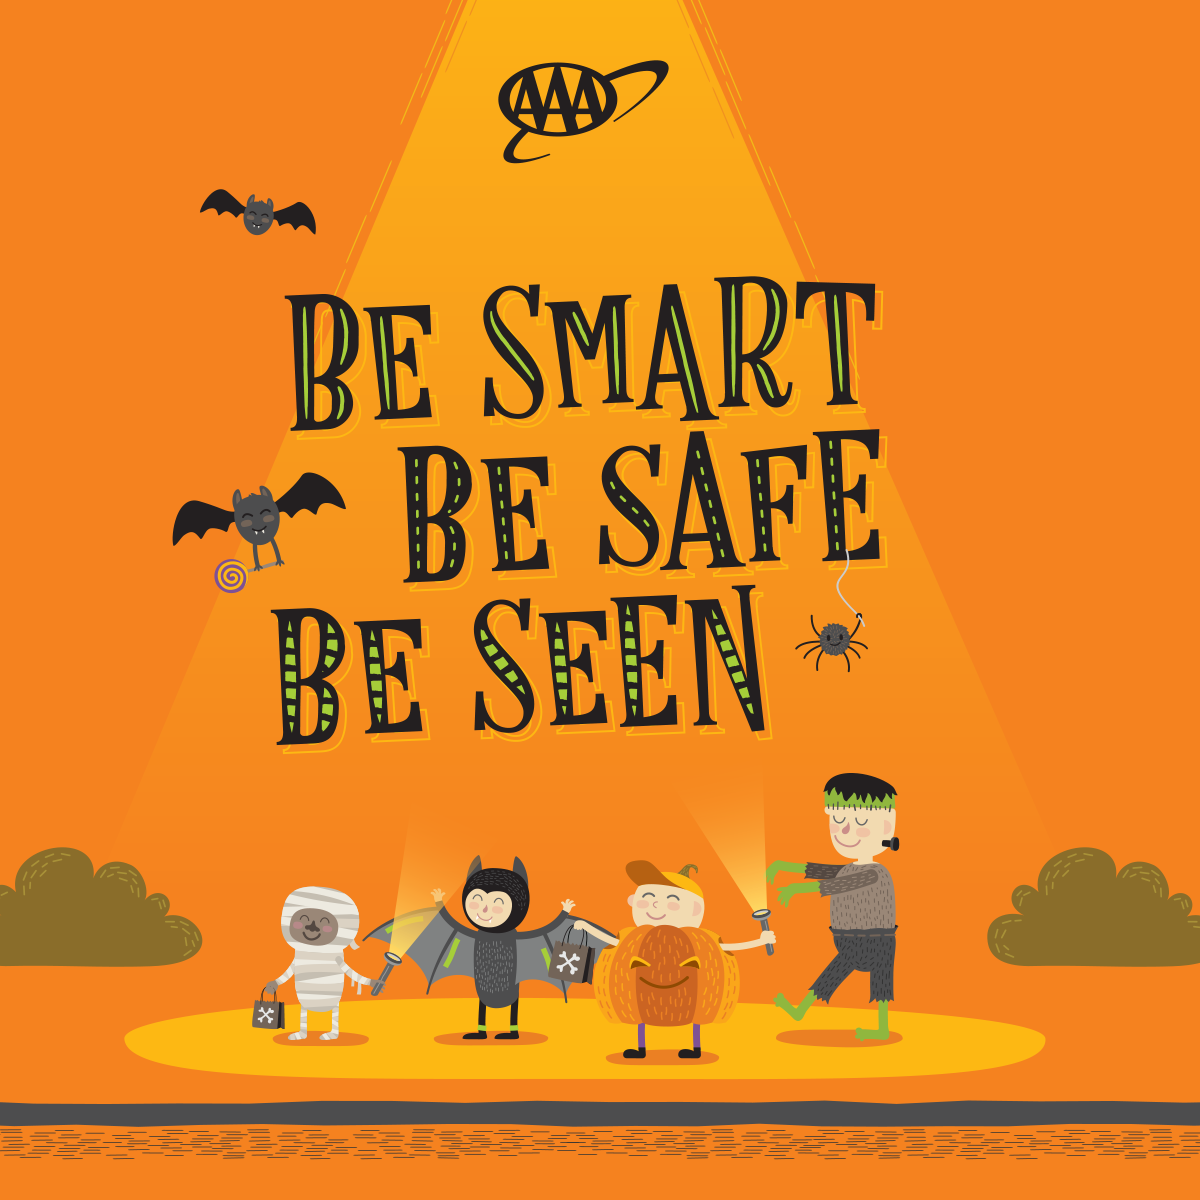 AAA Offers Advice to Stay Safe this Halloween